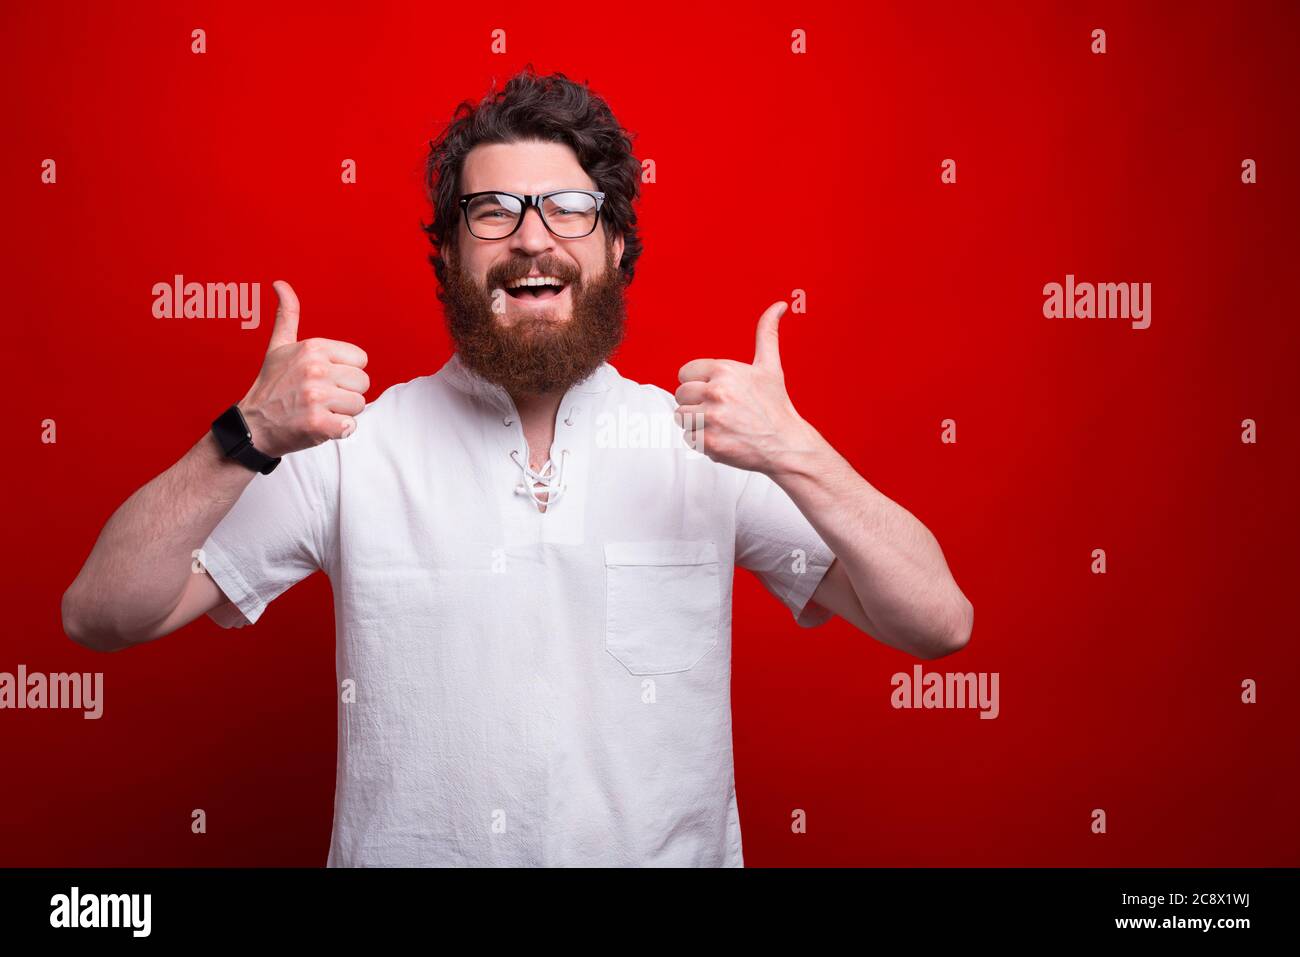 Photo of cheerful young man with beard showing thumbs up. Stock Photo